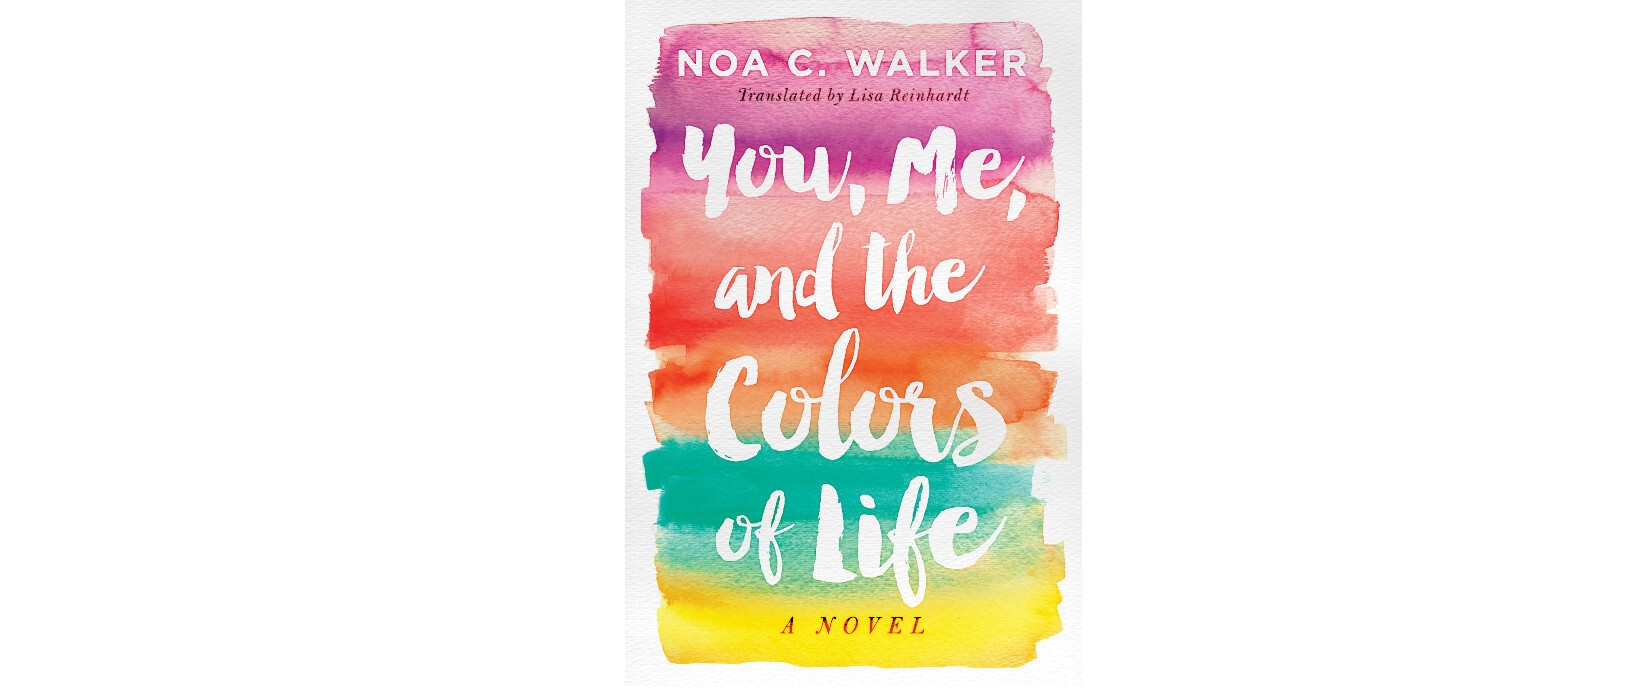 The book cover of "You, Me and the Colors of Life" is a colorful cover with title of the book in white. The colors appear to be waterpaint-like and from the bottom up go from yellow to teal to orange to coral to violet.